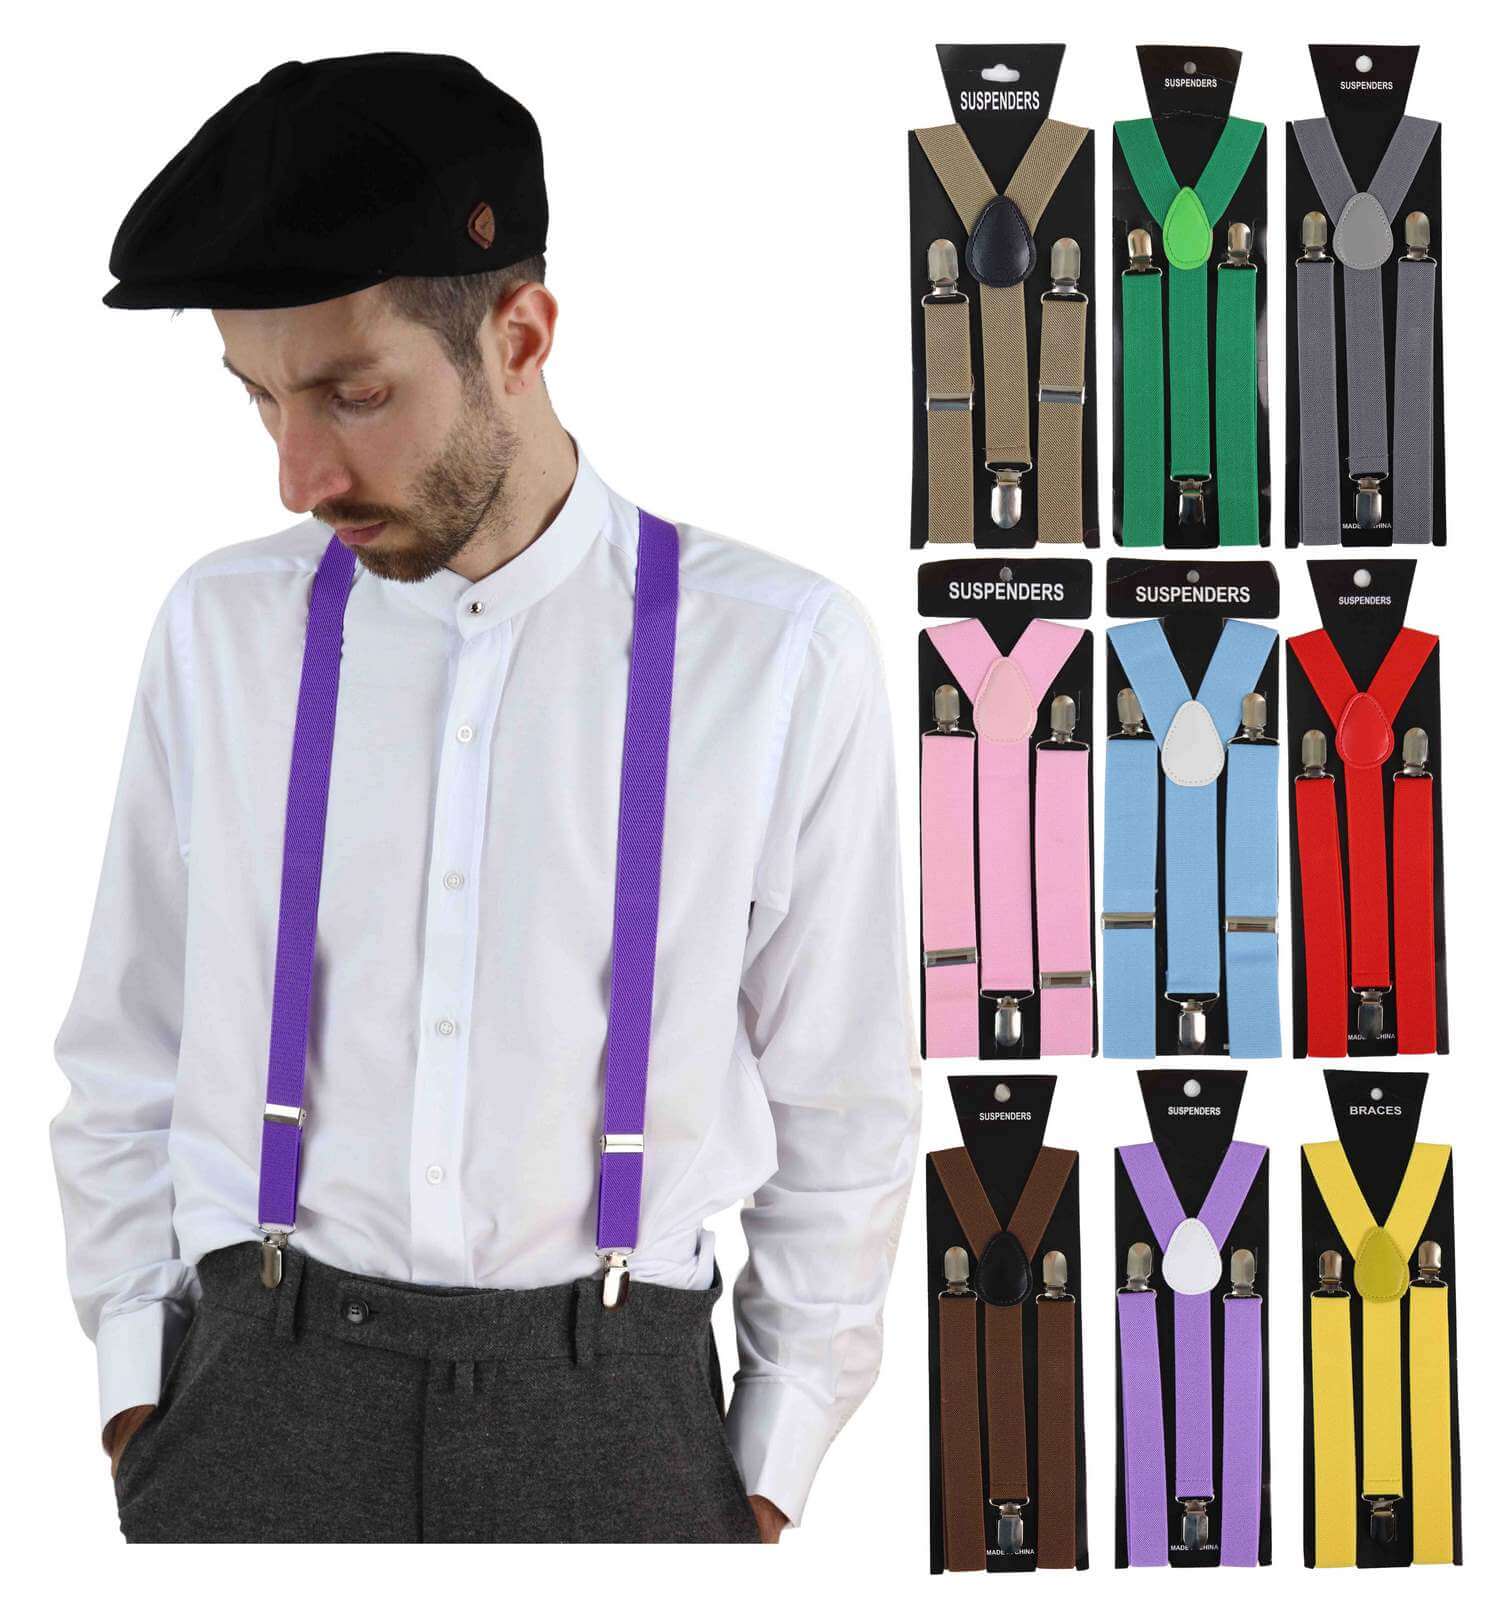 Women's Suspenders and Braces - All Colors and Patterns